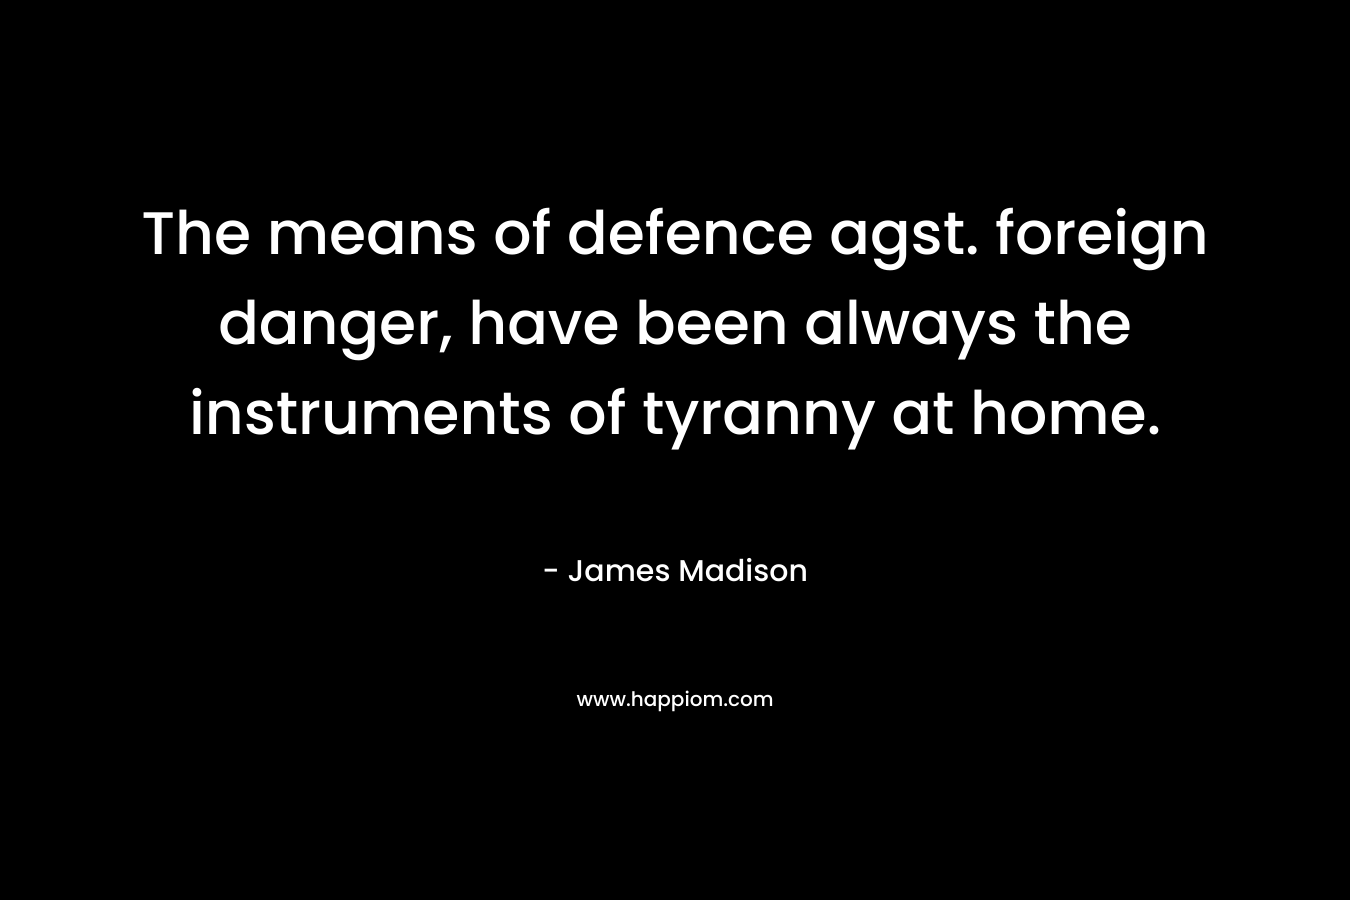 The means of defence agst. foreign danger, have been always the instruments of tyranny at home.